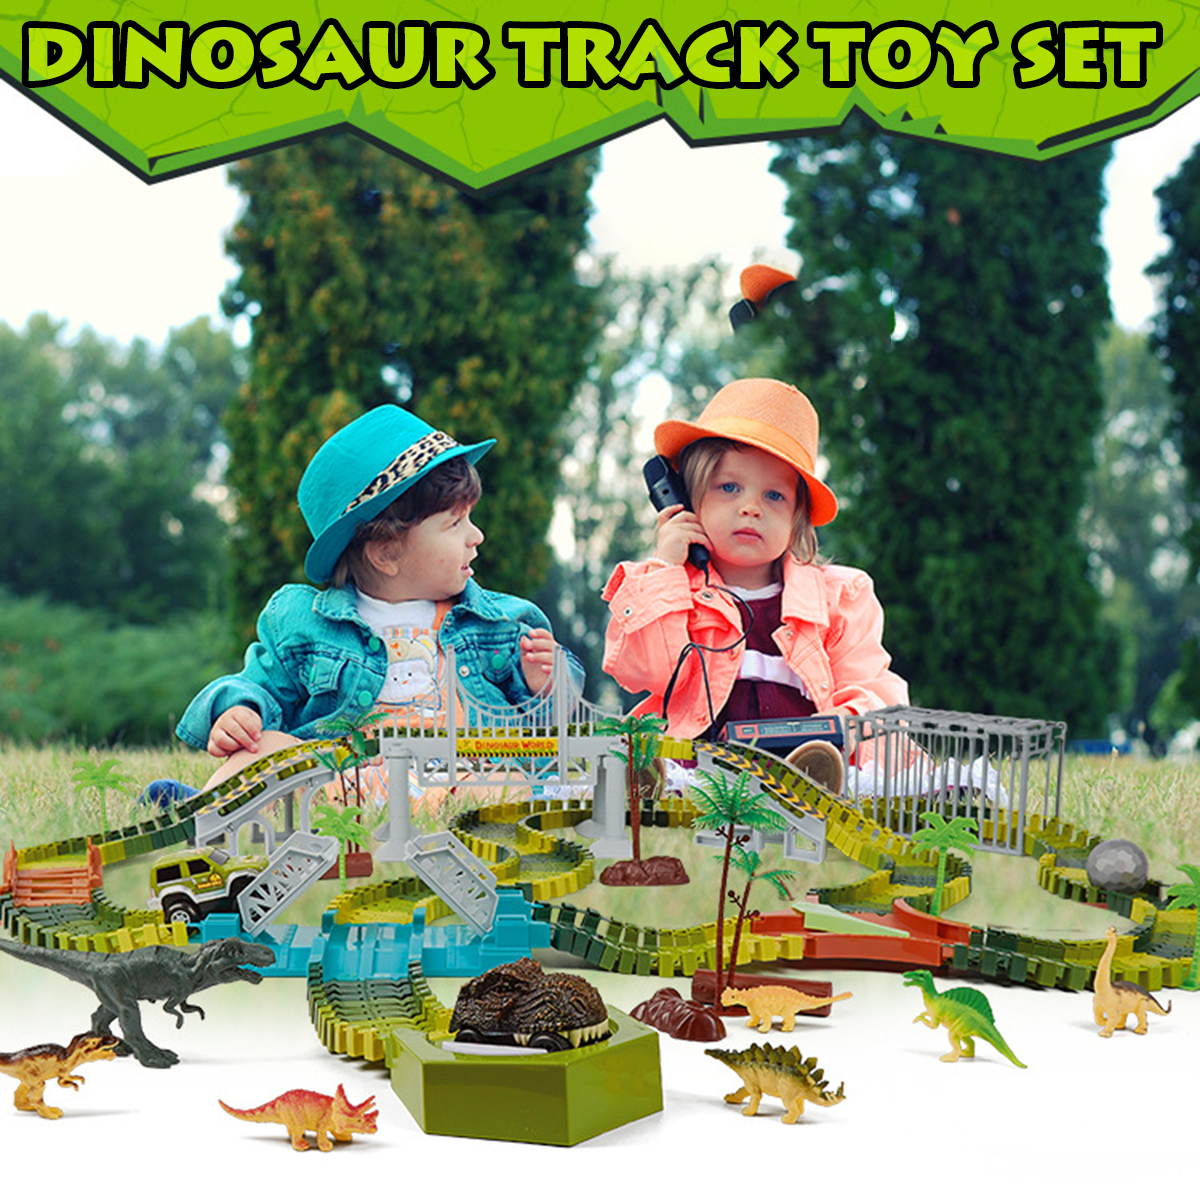 Dinosaur-World-Flexible-Racing-Car-Track-Toys-Construction-Play-Game-Educational-Set-Toy-for-Kids-Gi-1693947-2